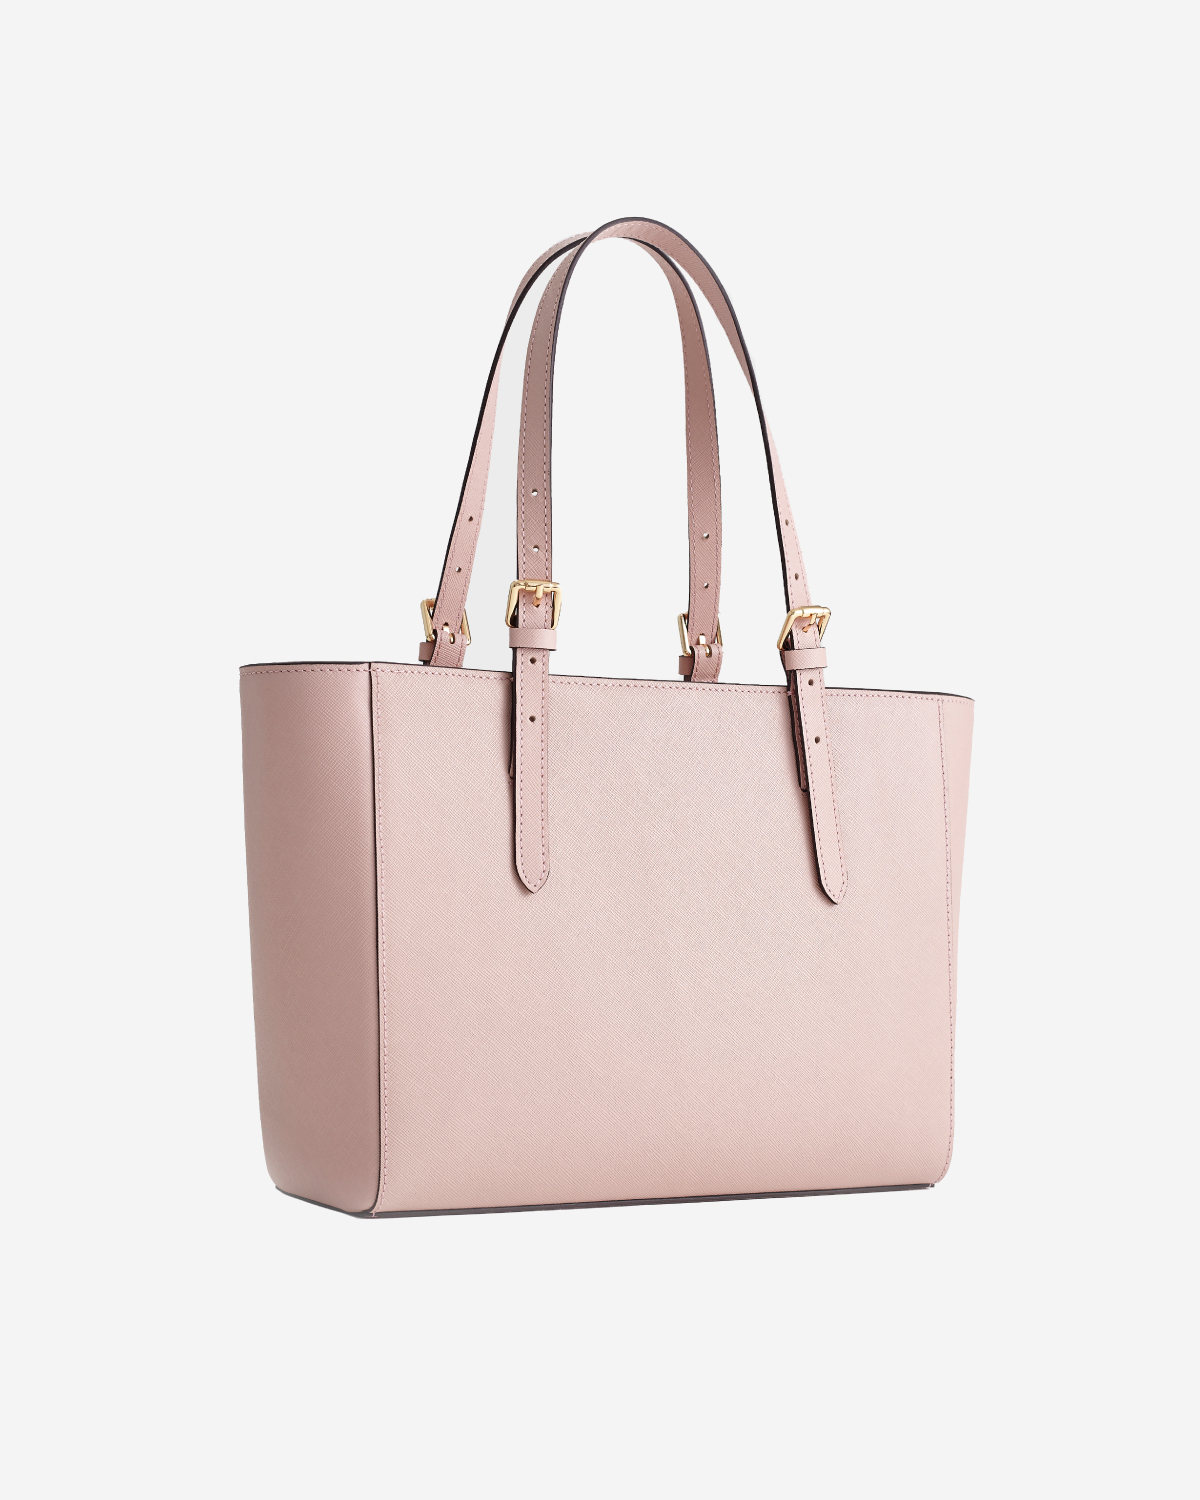 VERA The First Bag in Soft Pink